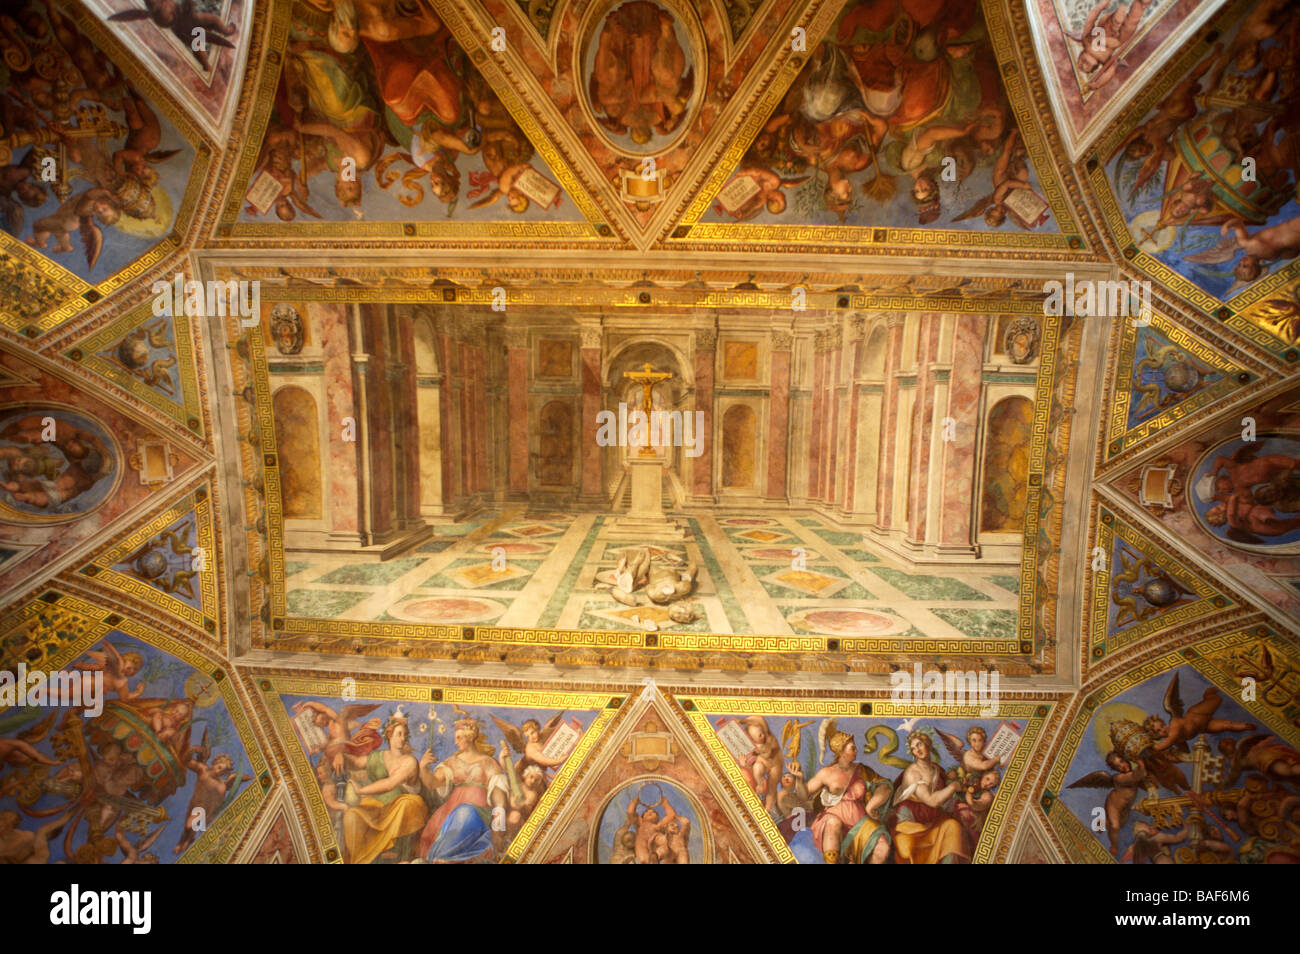 One of the ornately painted ceiling leading to the Sistine Chapel in the Vatican in Rome Stock Photo